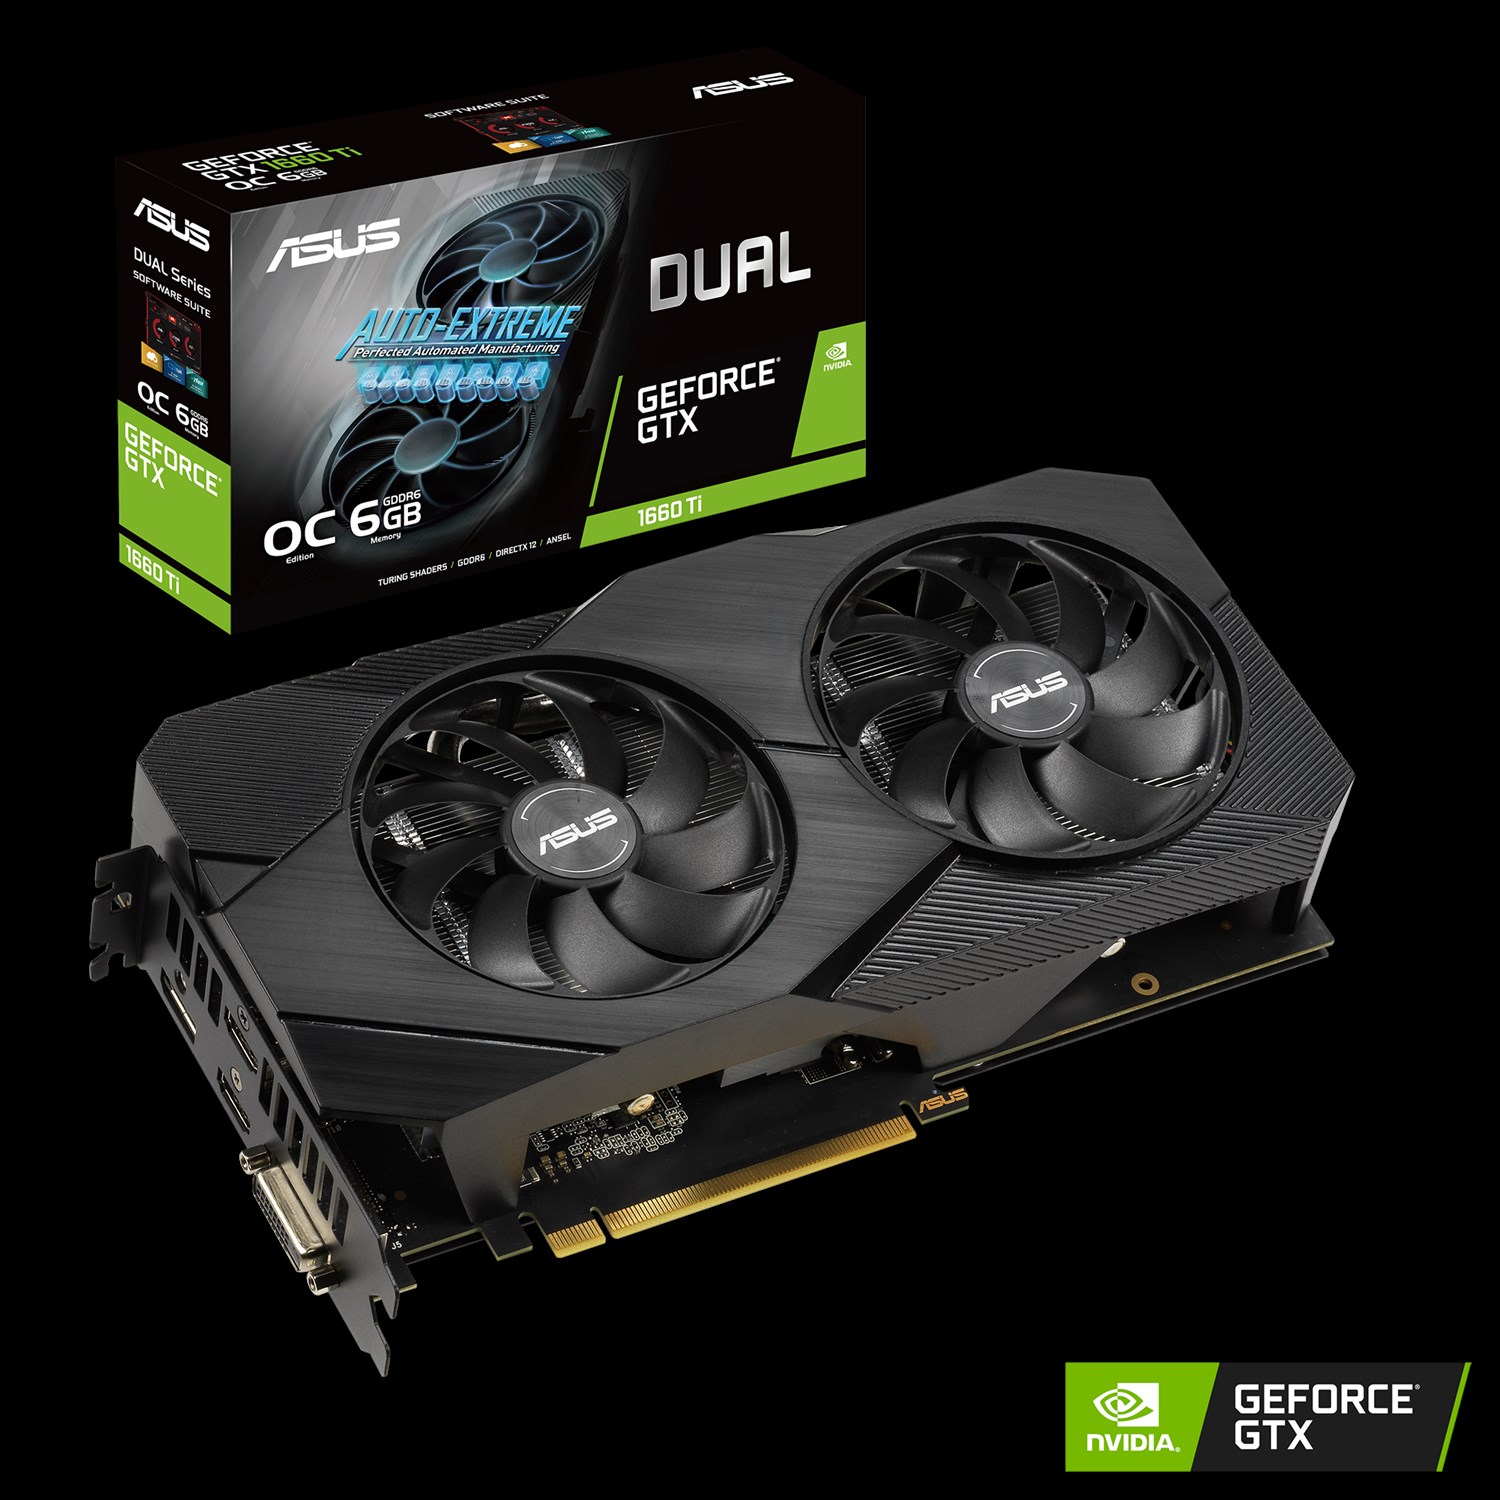 Overflod Kostbar omfattende Asus Boosts GTX 1660 Ti Lineup With New Evo Series Graphics Cards | Tom's  Hardware